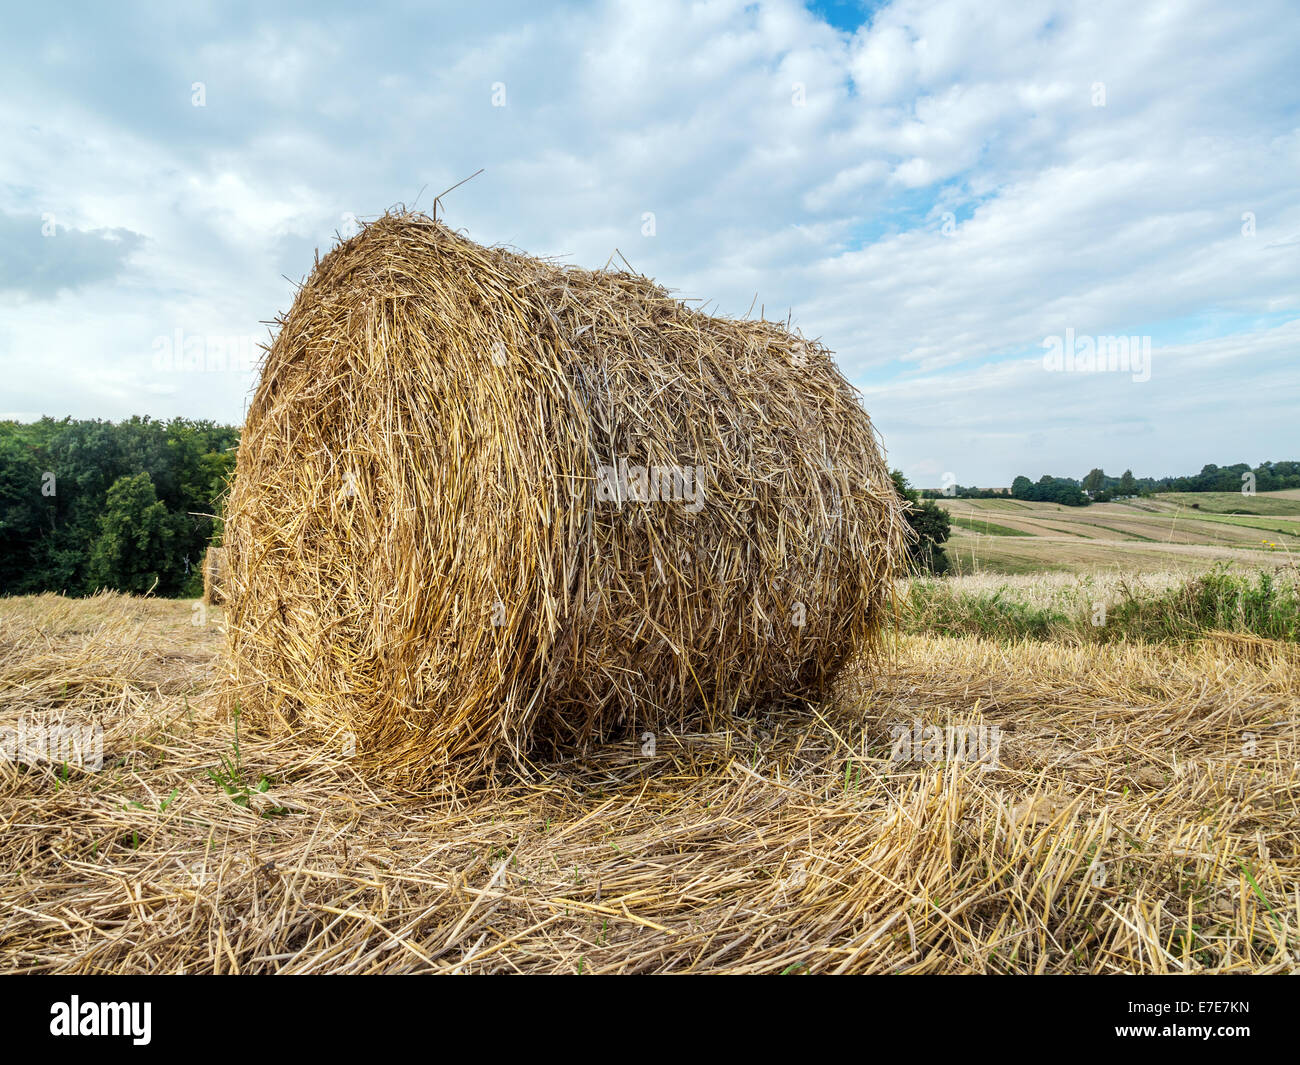 Hay bale drying on the open air Stock Photo